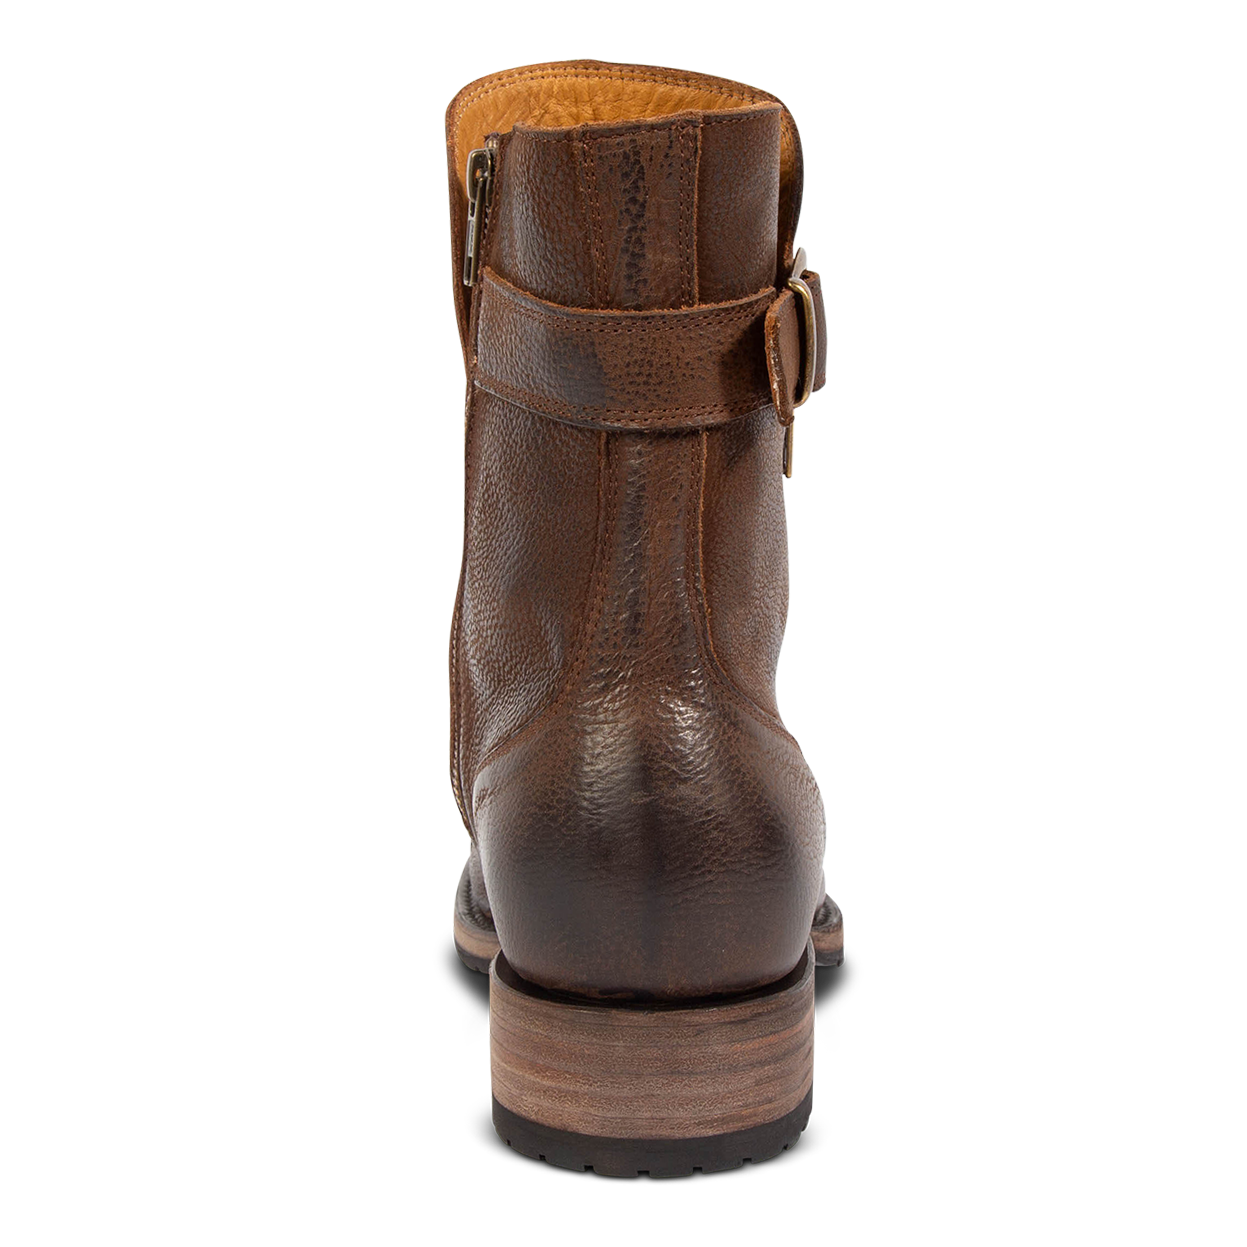 Back view showing adjustable rear buckle and low block heel on FREEBIRD men's Chayse brown leather boot